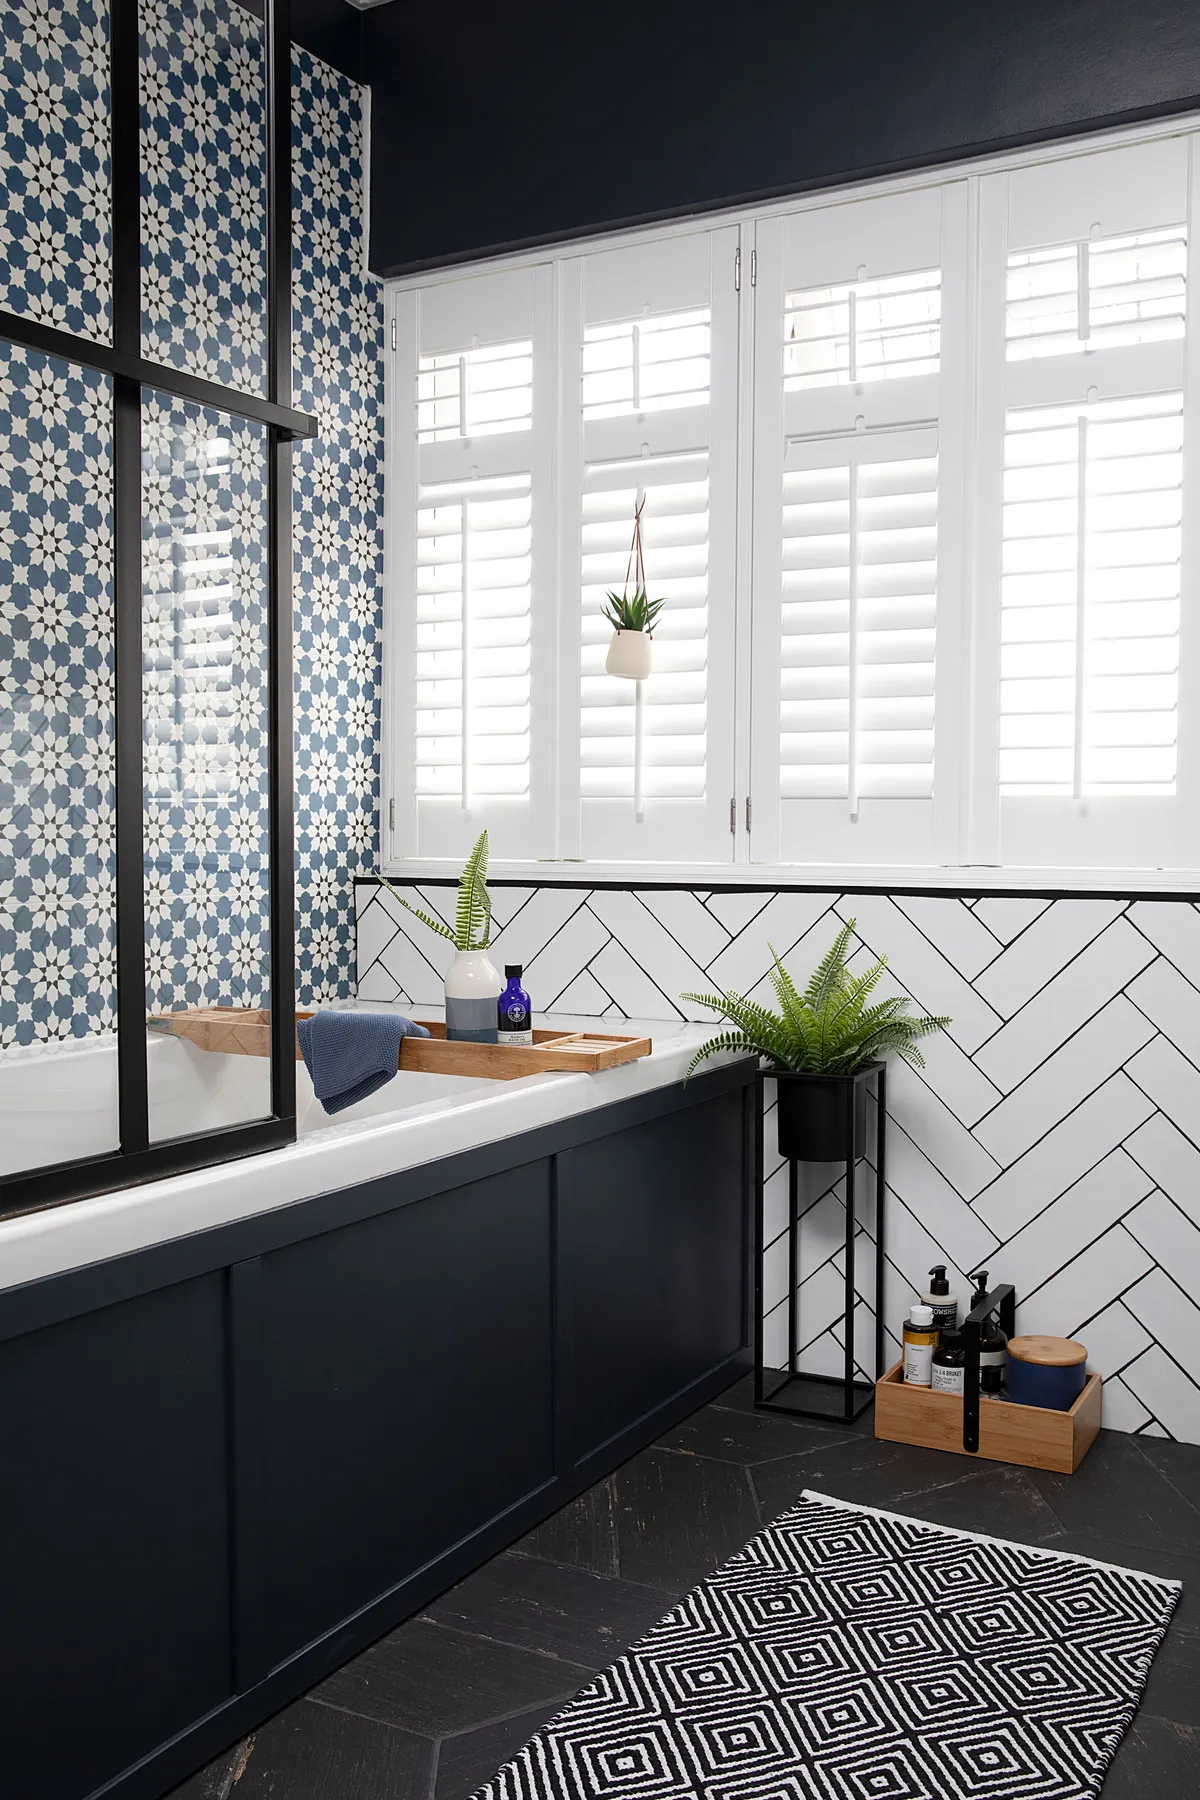 Good idea! Use a hue from patterned tiles throughout for a co-ordinated look, as Claire has with the black details in hers